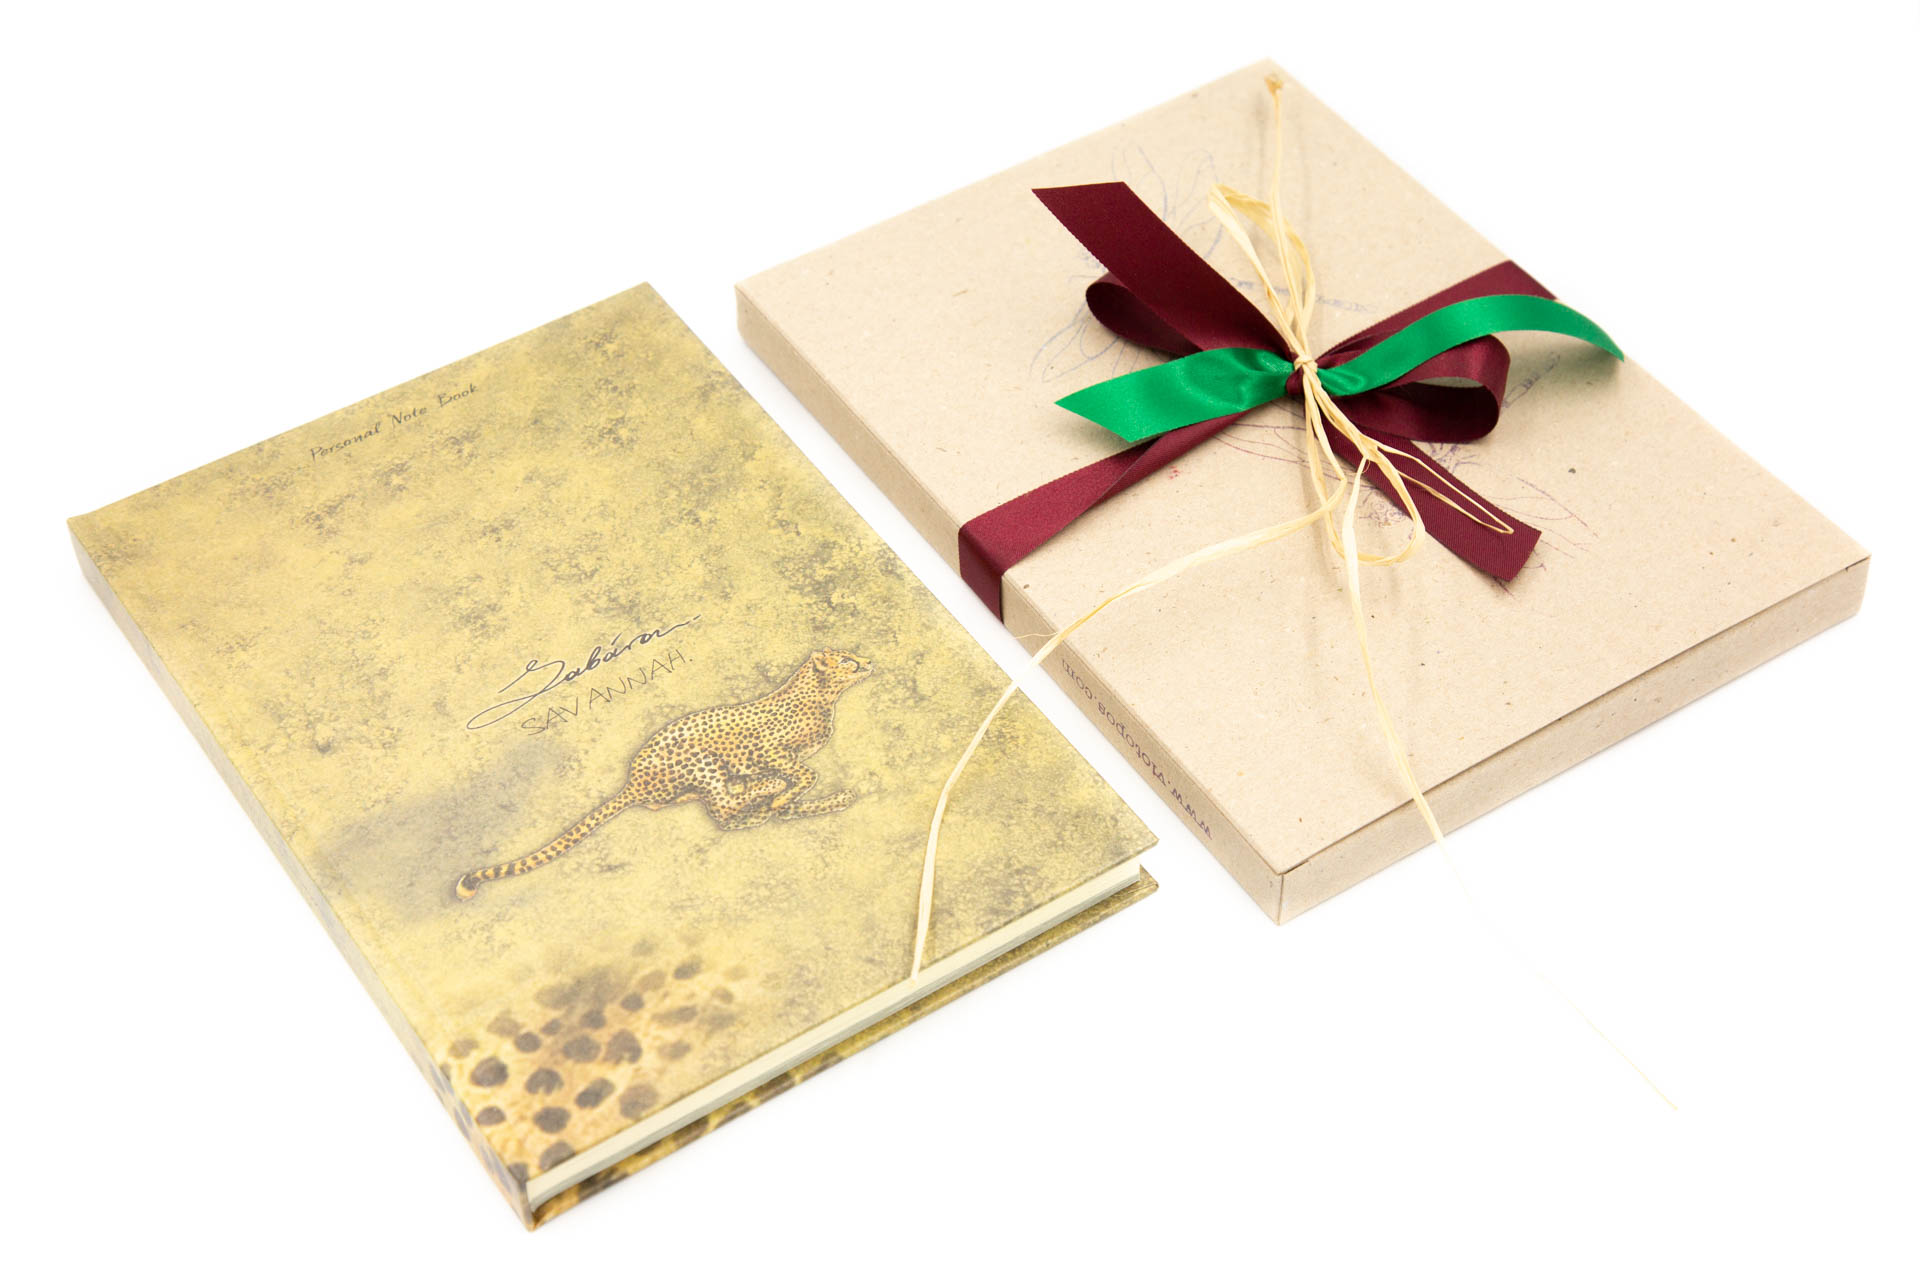 Personal notebook "Savannah" - Front and Package